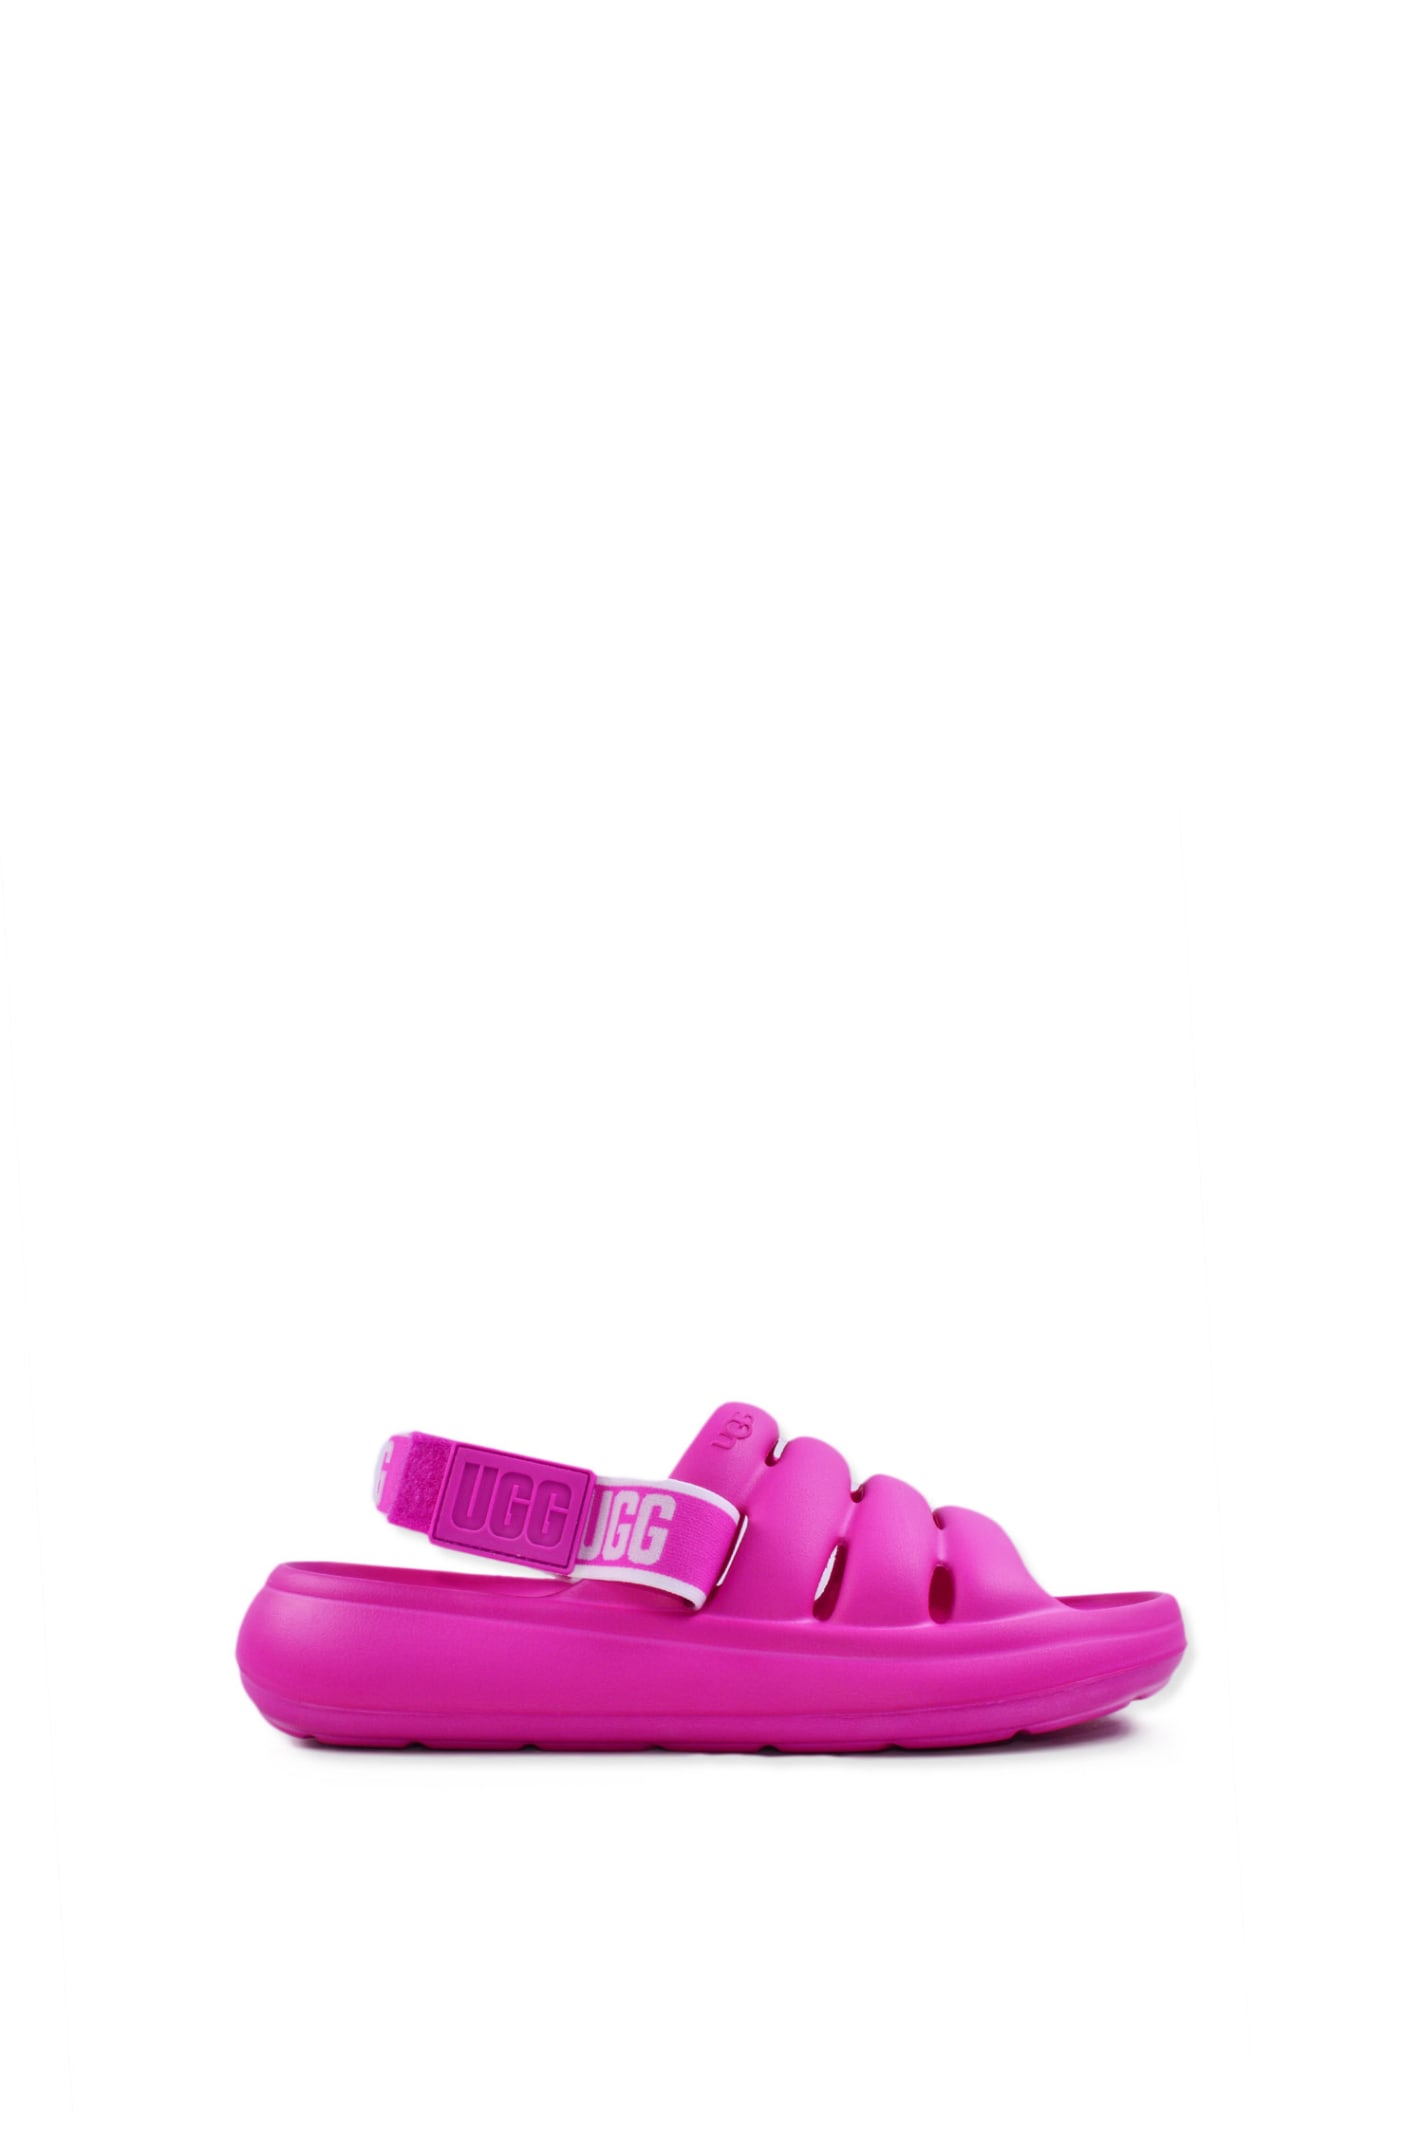 Ugg Kids' Sandals With Strap In Fuchsia